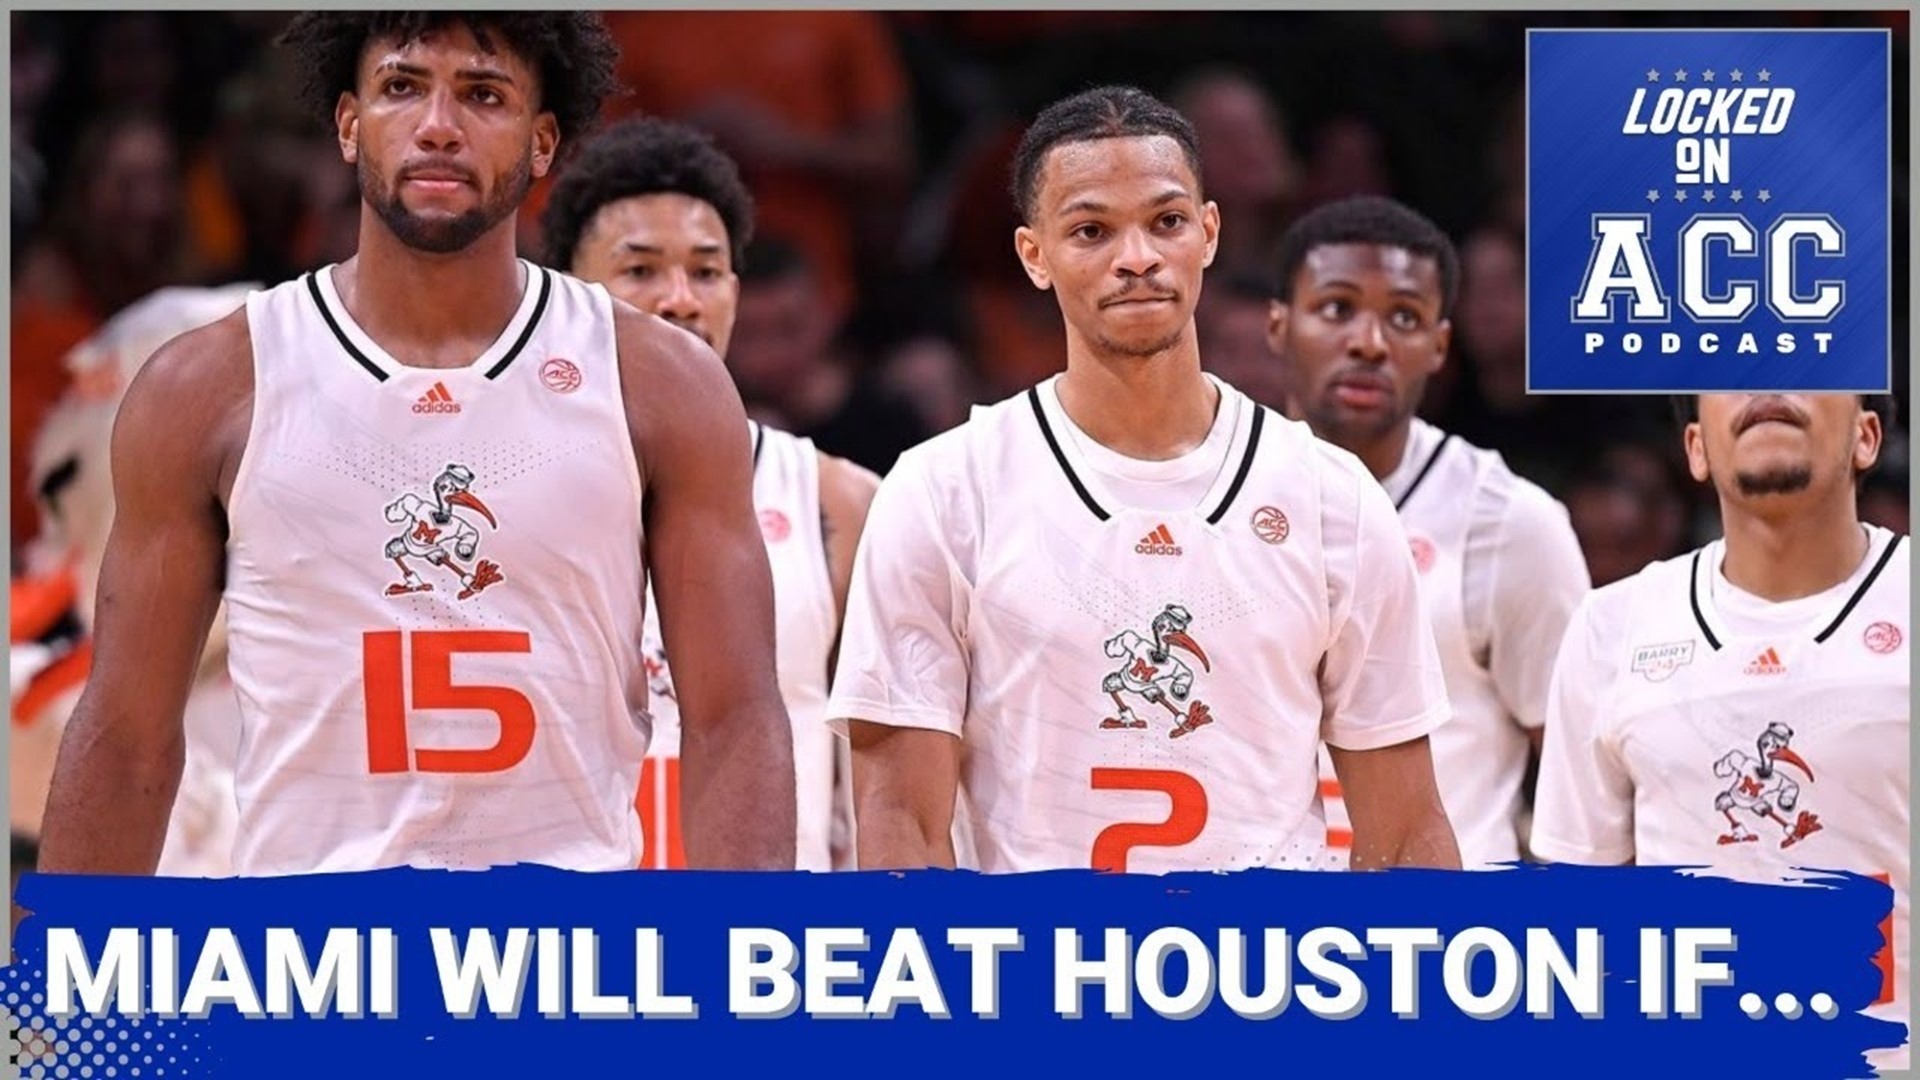 The Miami Hurricanes are use to upsets in the NCAA Tournament. They relish in them in fact. For the team to make it to the Elite Eight, they'll need to beat Houston.